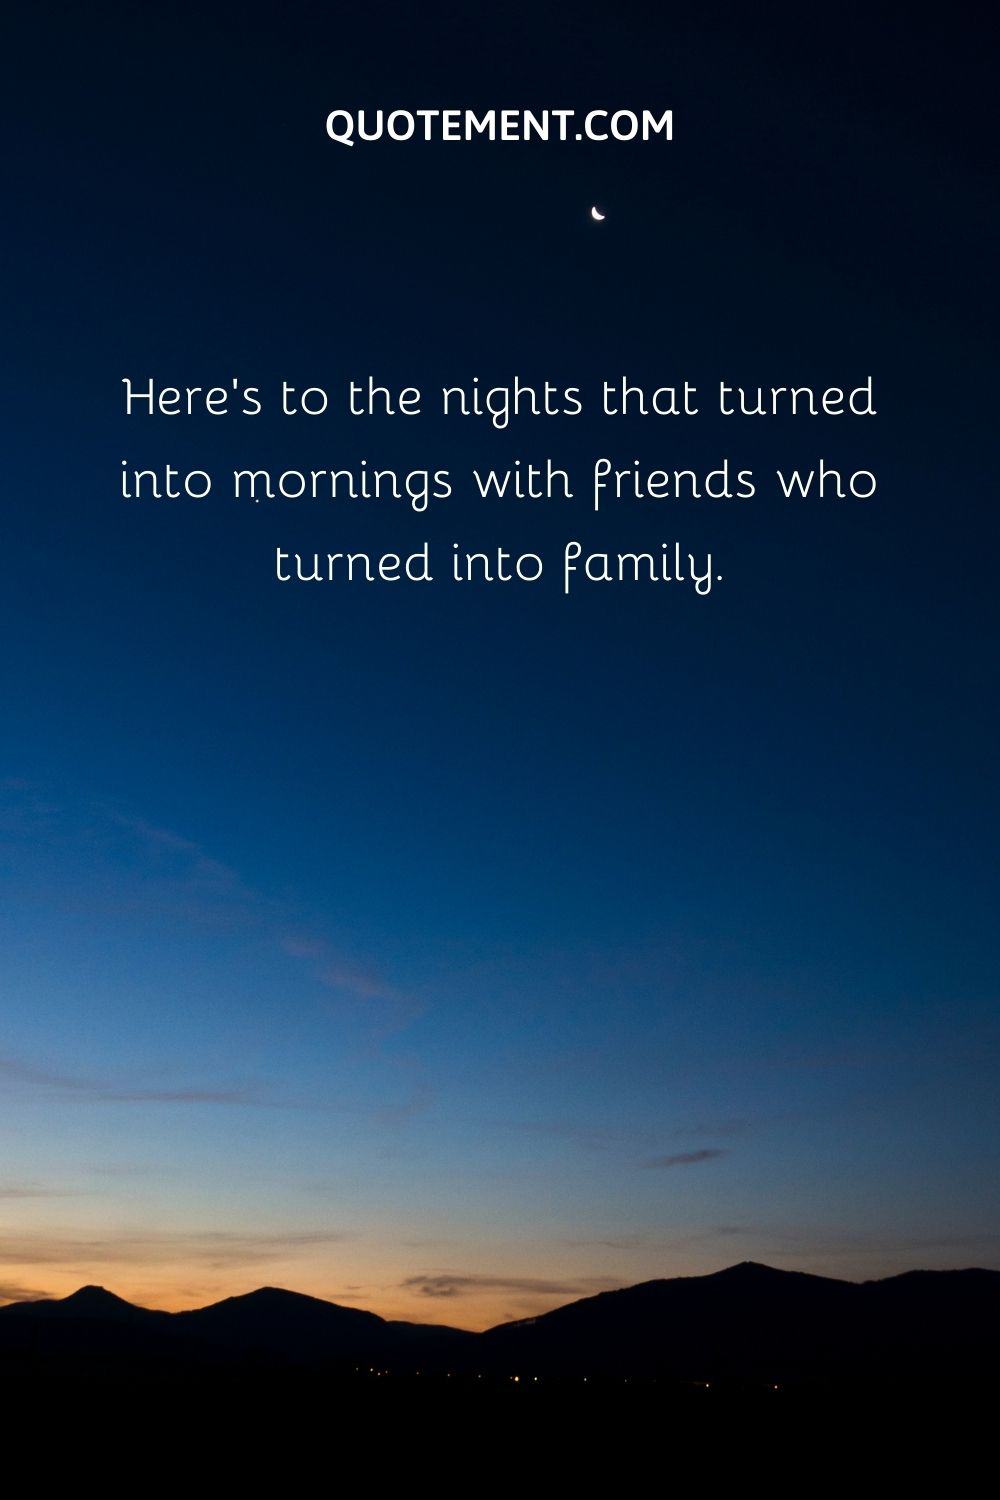 Here's to the nights that turned into mornings with friends who turned into family